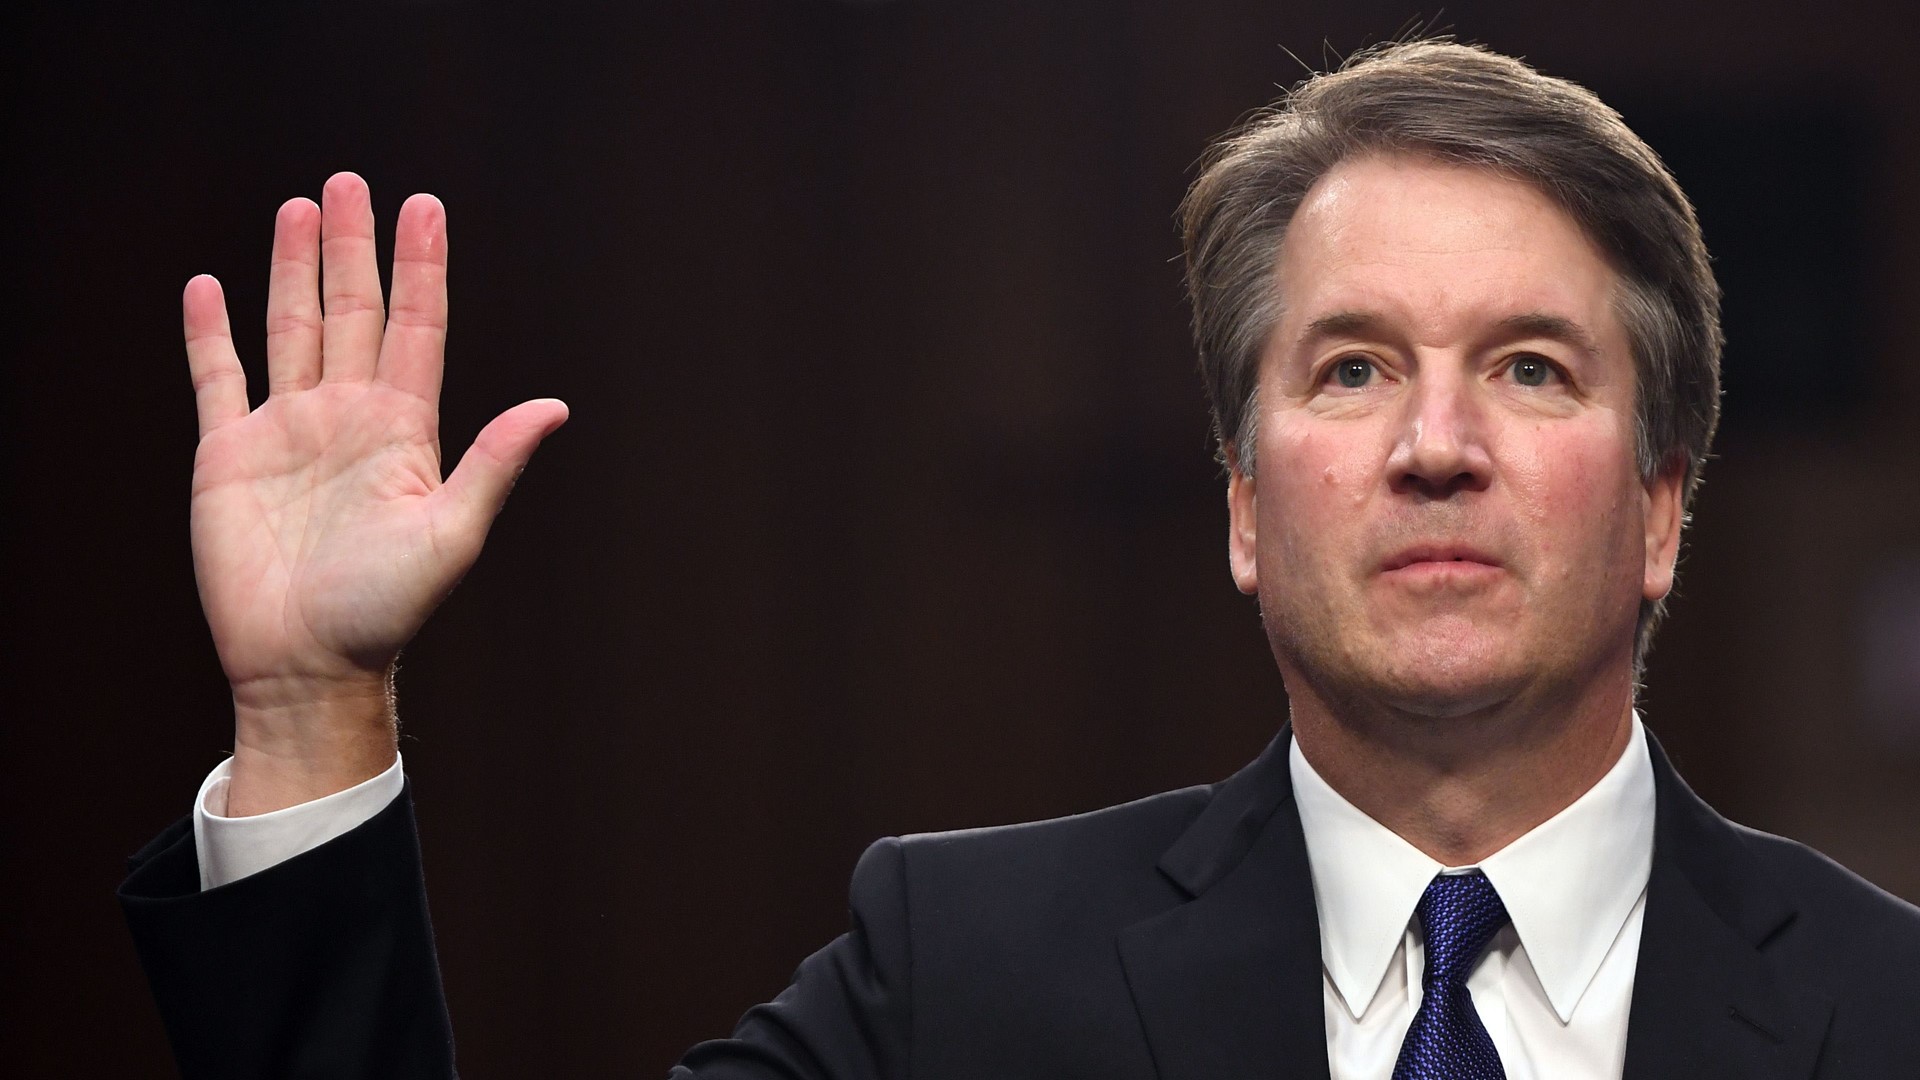 With the new year just a few weeks away, we're counting down the top 18 stories of 2018. At number 17 is the divisive story of Brett Kavanaugh being confirmed to the US Supreme Court and the role US Senator Jeff Flake played in that confirmation.